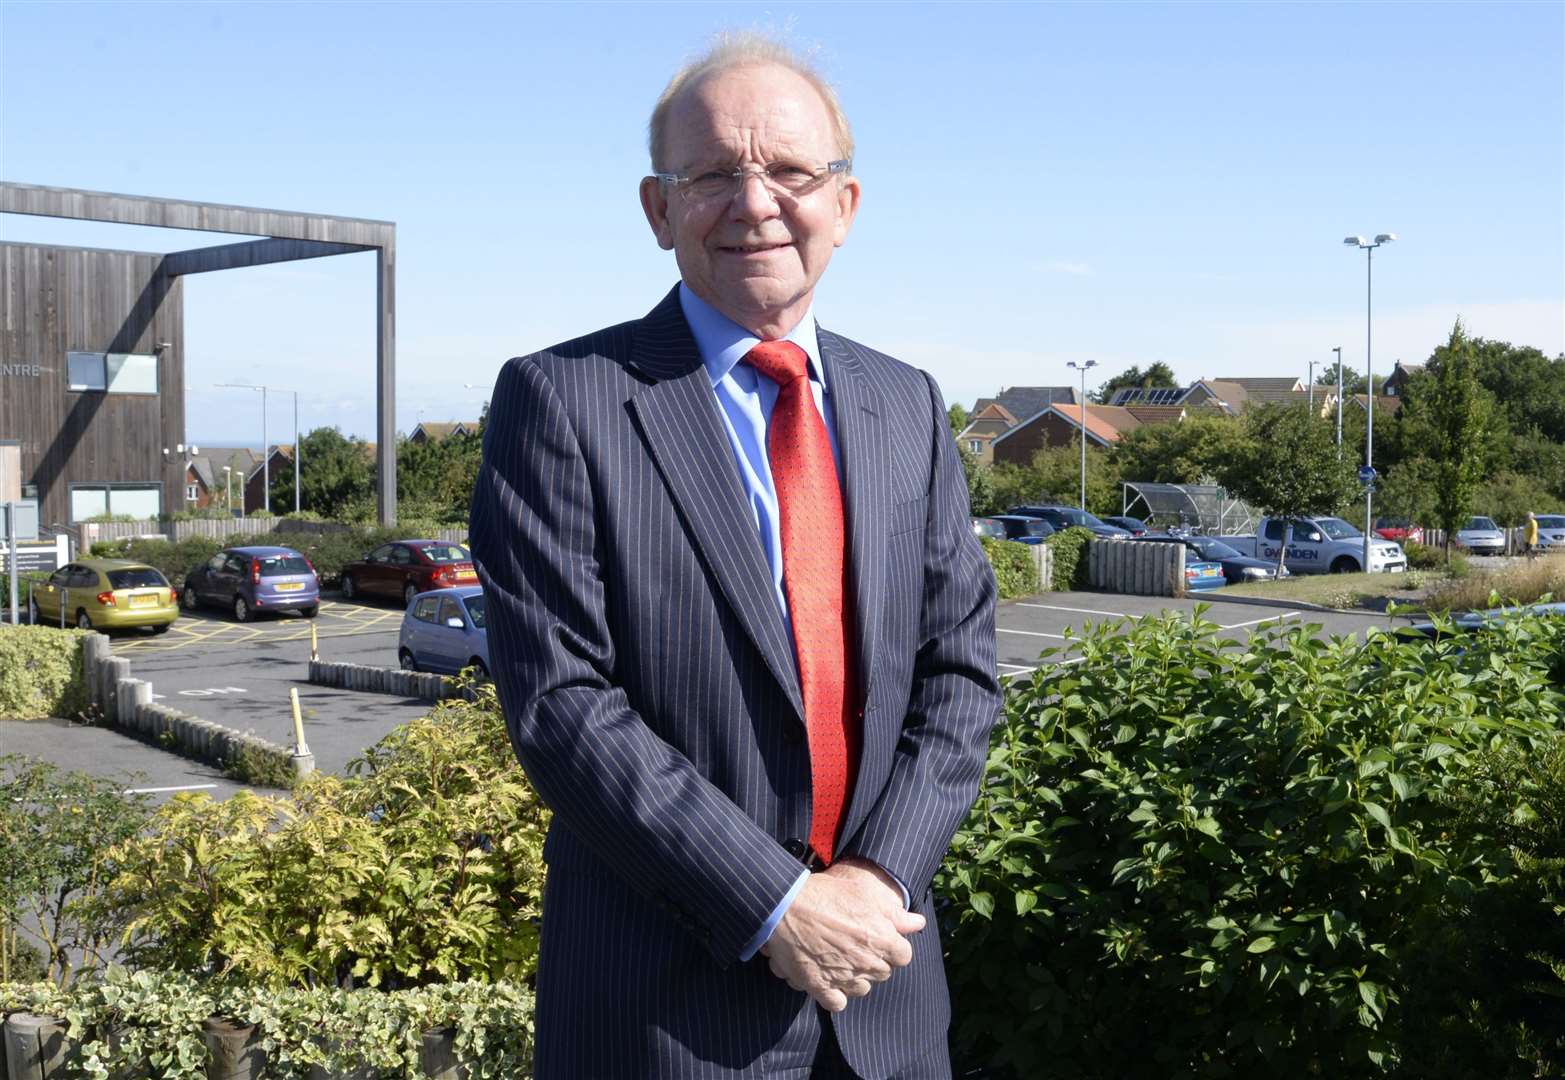 Dr John Ribchester, senior and executive partner at Whitstable Medical Practice. Picture: Chris Davey